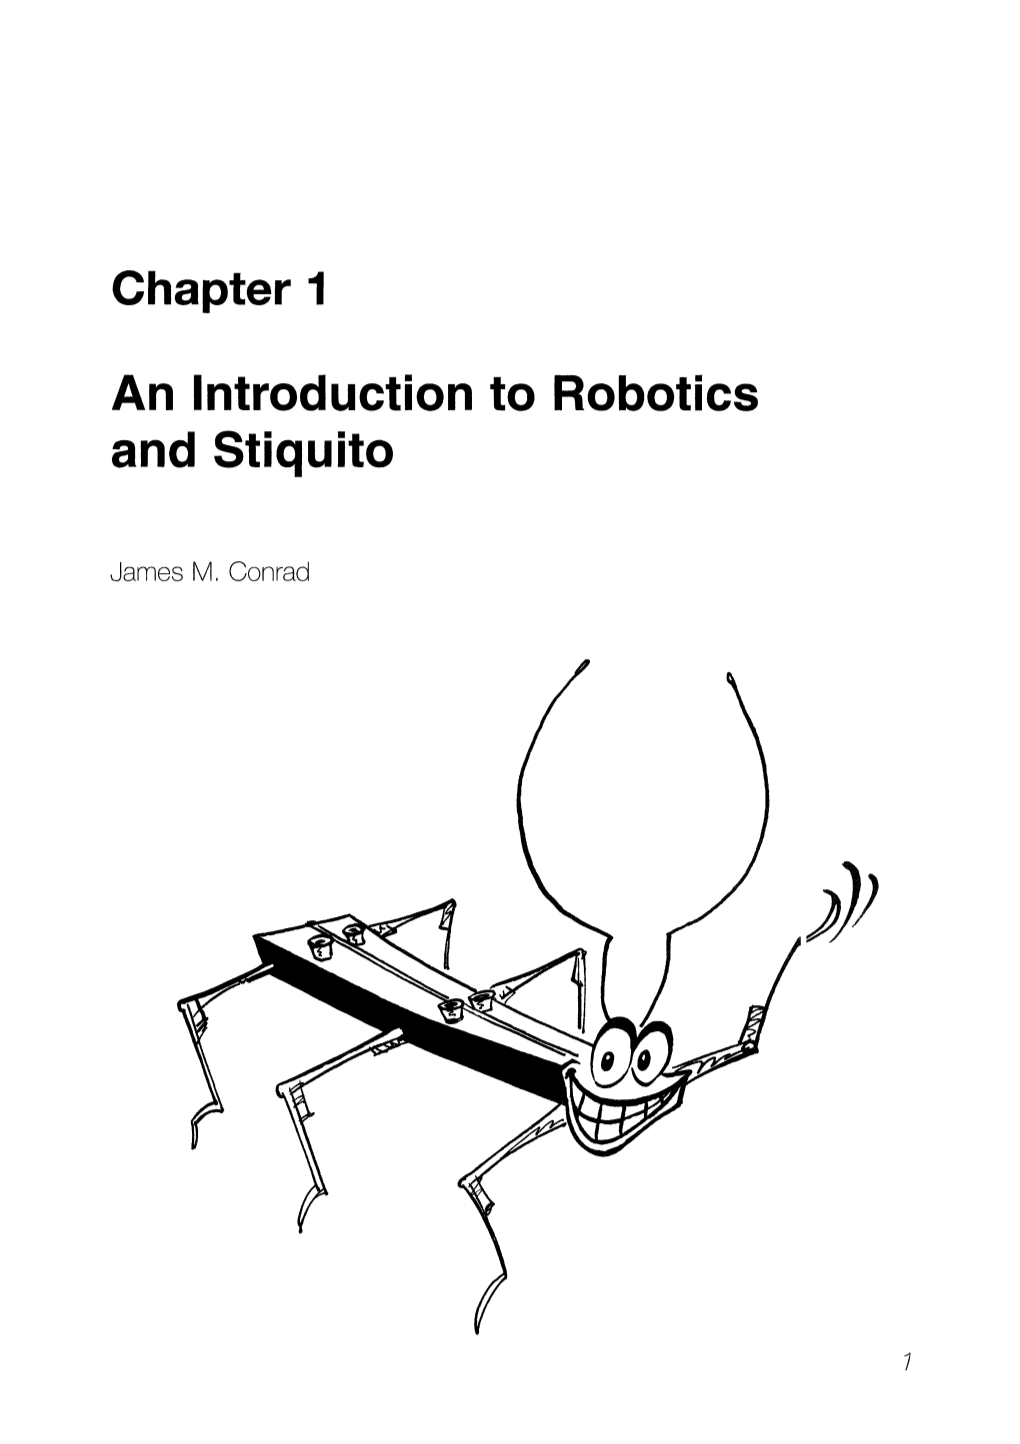 Chapter 1 an Introduction to Robotics and Stiquito